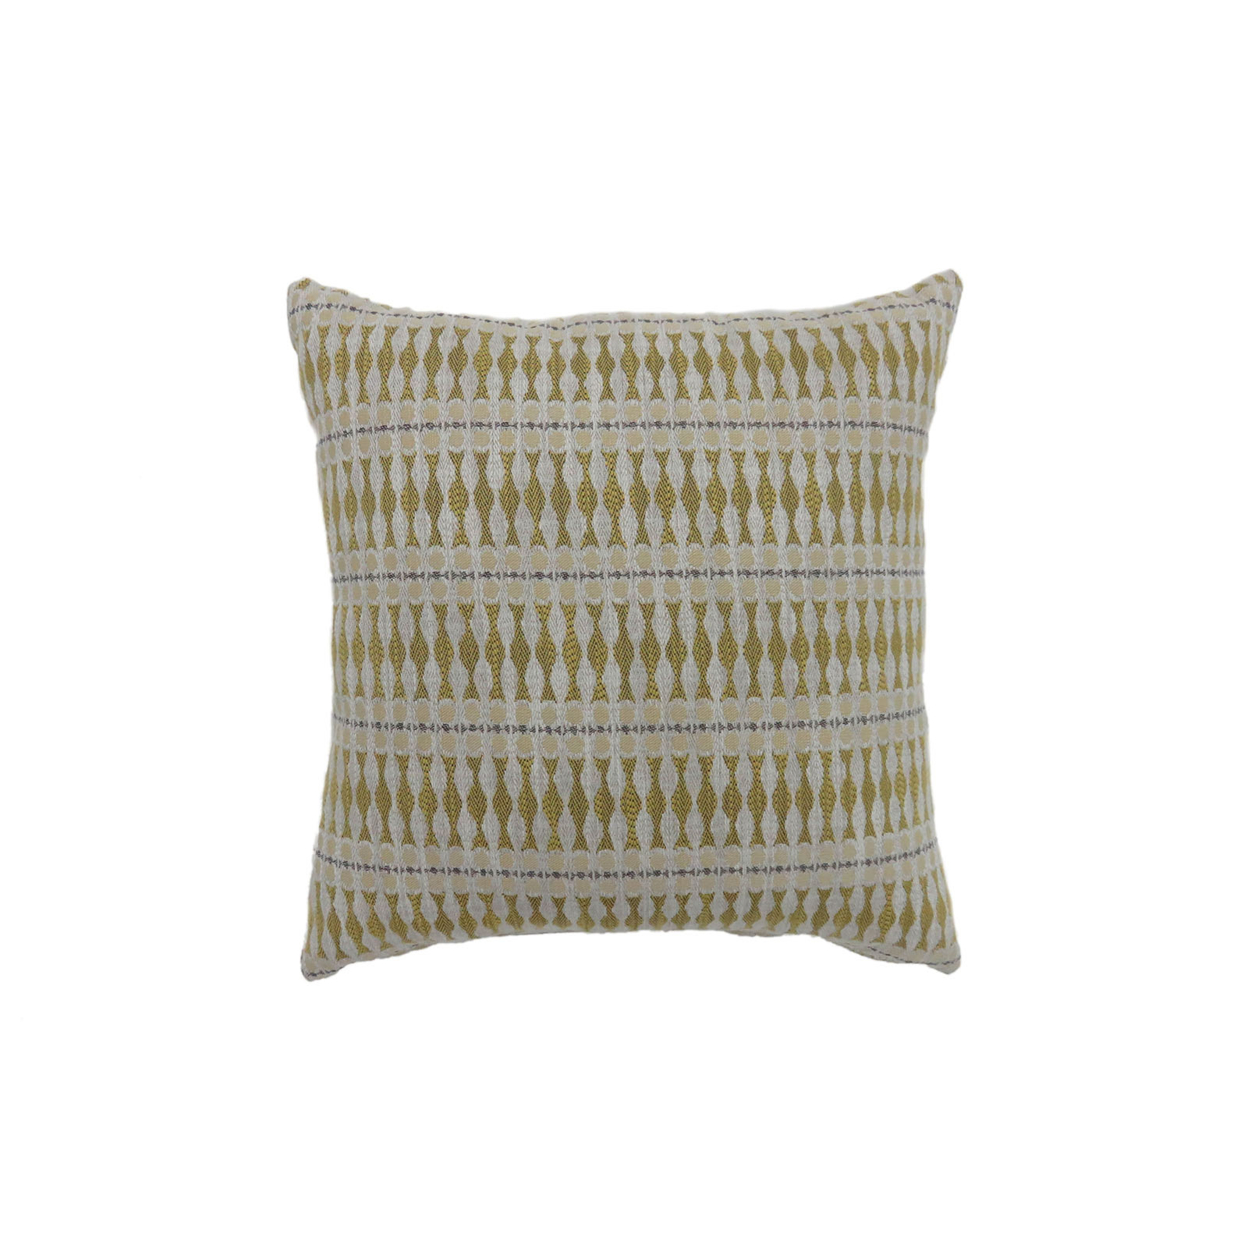 18 Inch Throw Pillow, Set Of 2, Tribal Pattern Polyester Fabric, Gray, Yellow